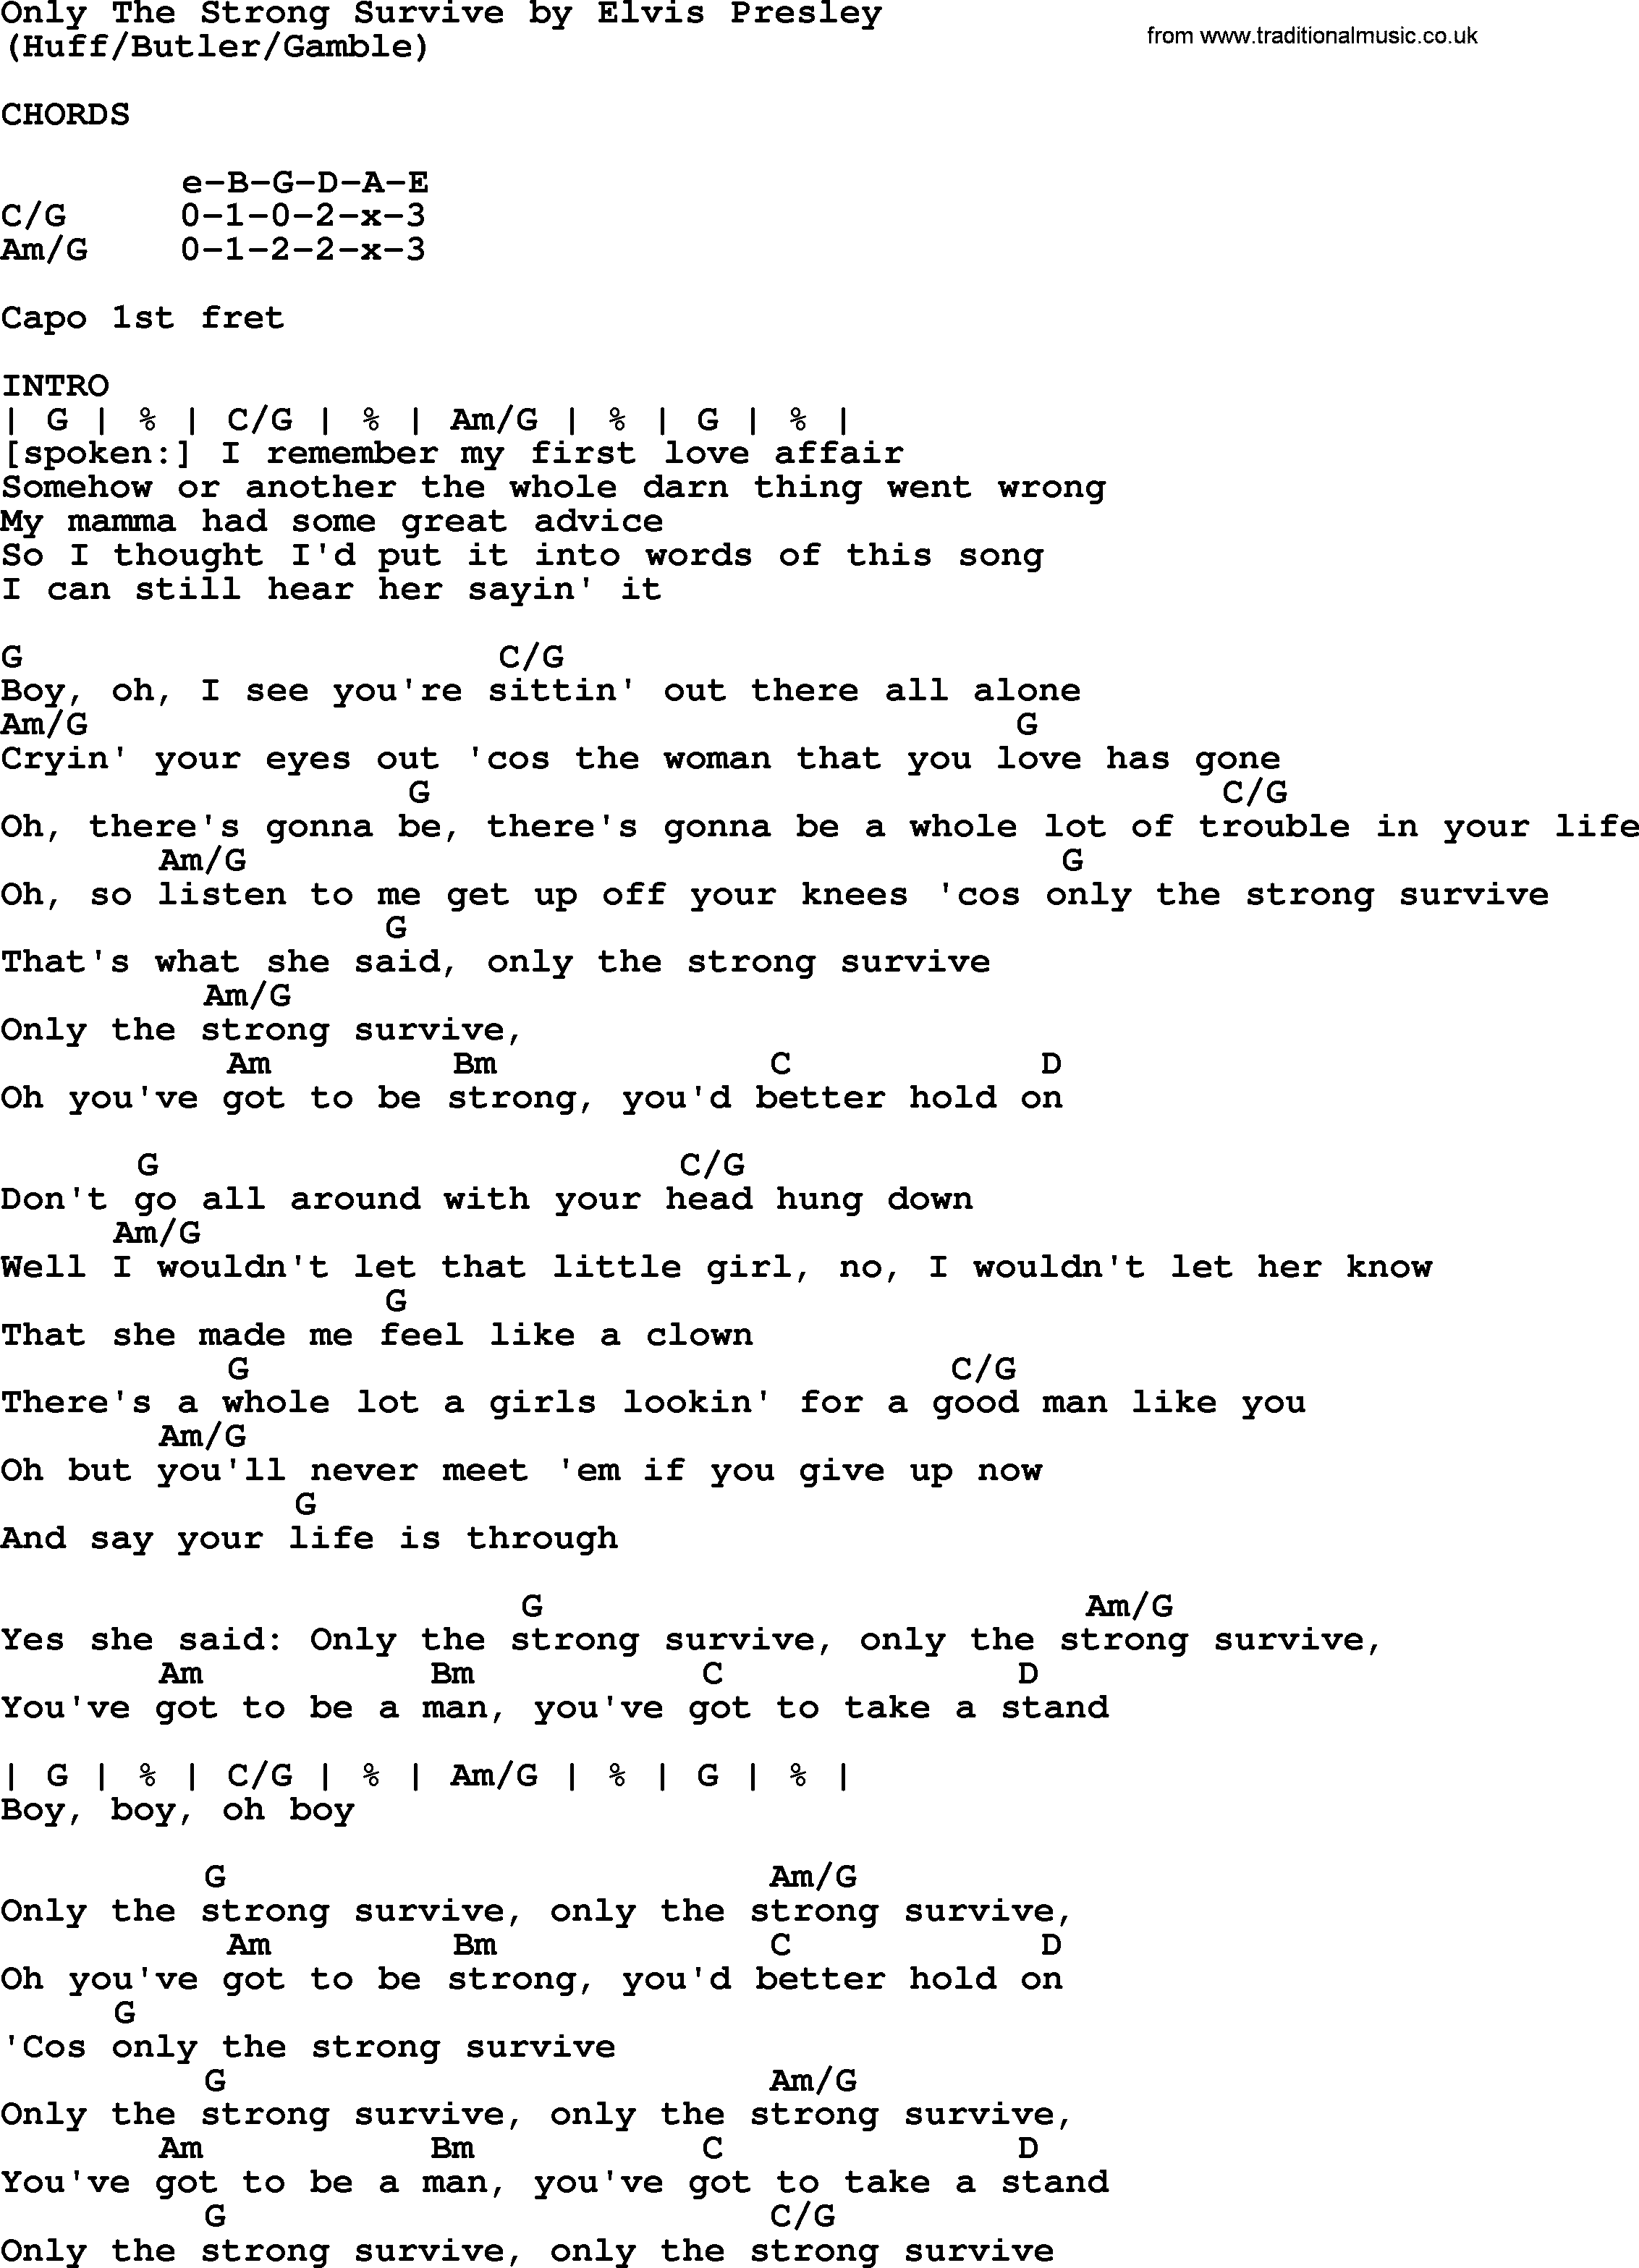 Elvis Presley song: Only The Strong Survive, lyrics and chords